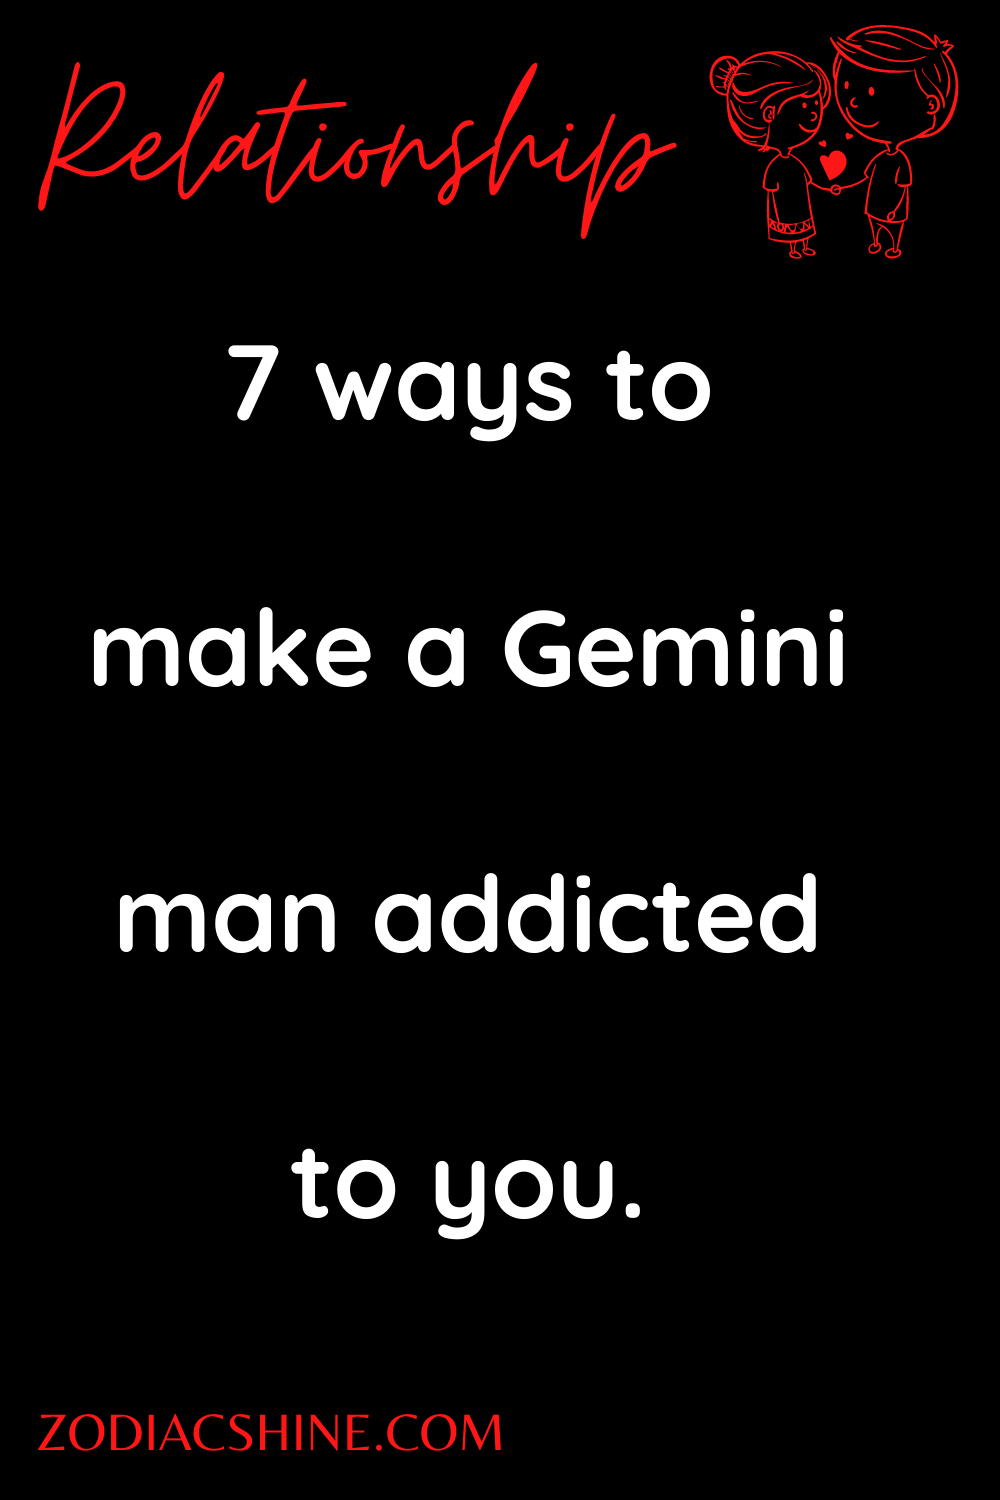 7 ways to make a Gemini man addicted to you.